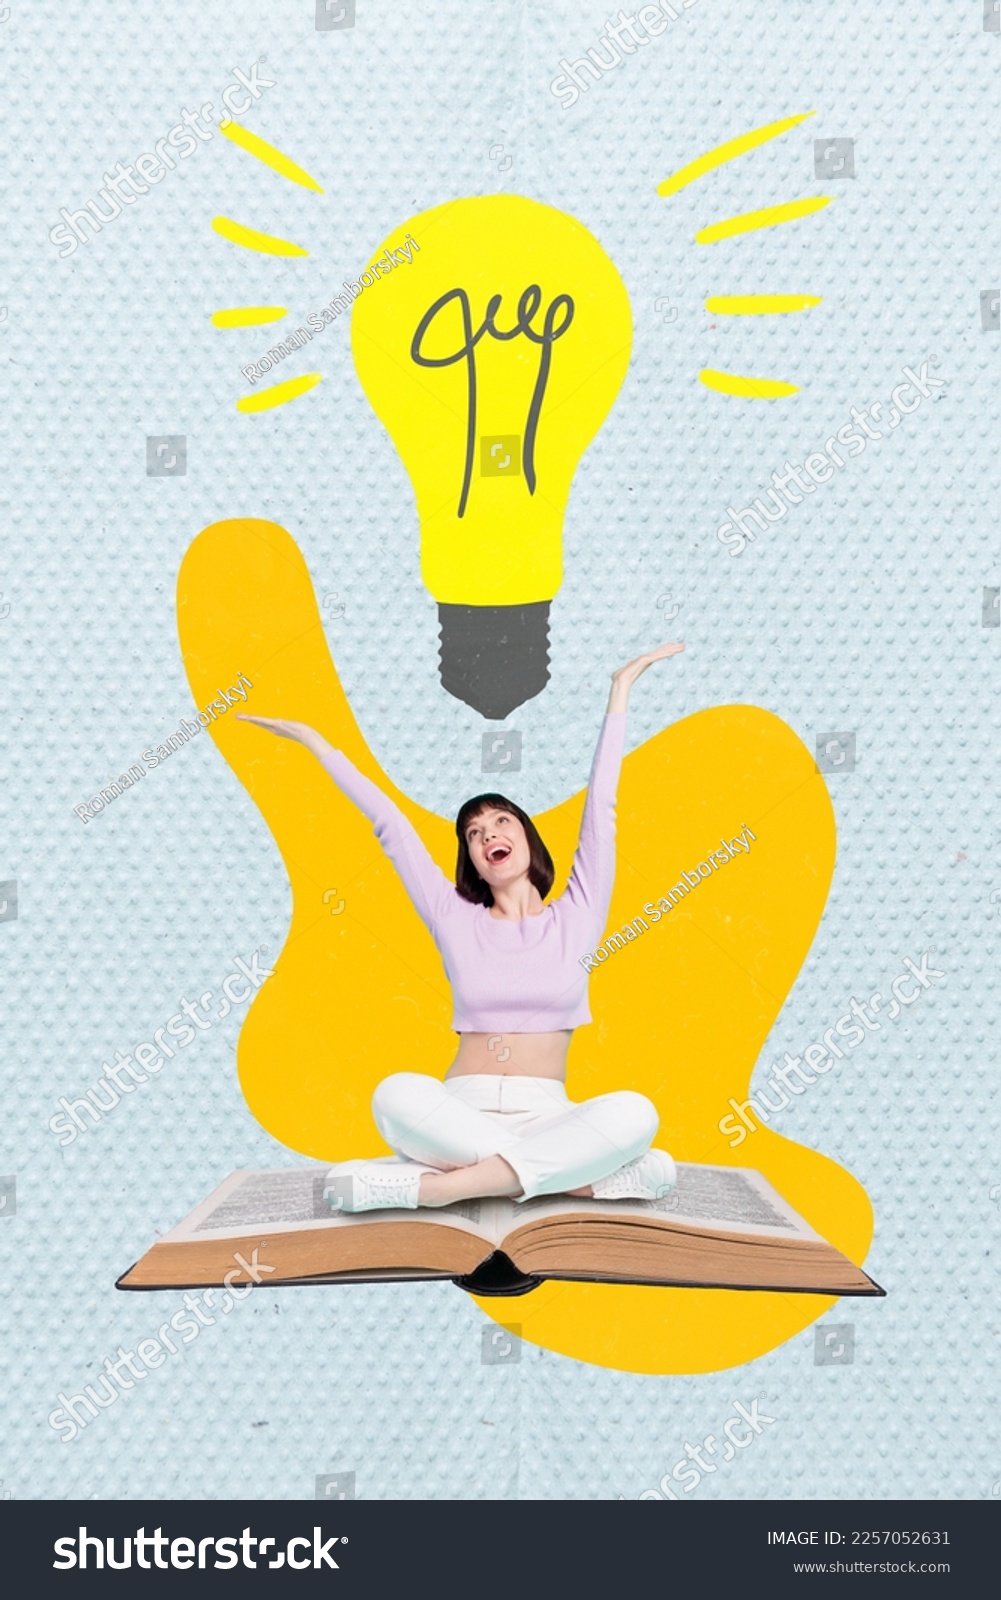 Creative graphics 3d collage of excited girl learning nerd have inspiration lamp bulb genius decision sit open book #2257052631